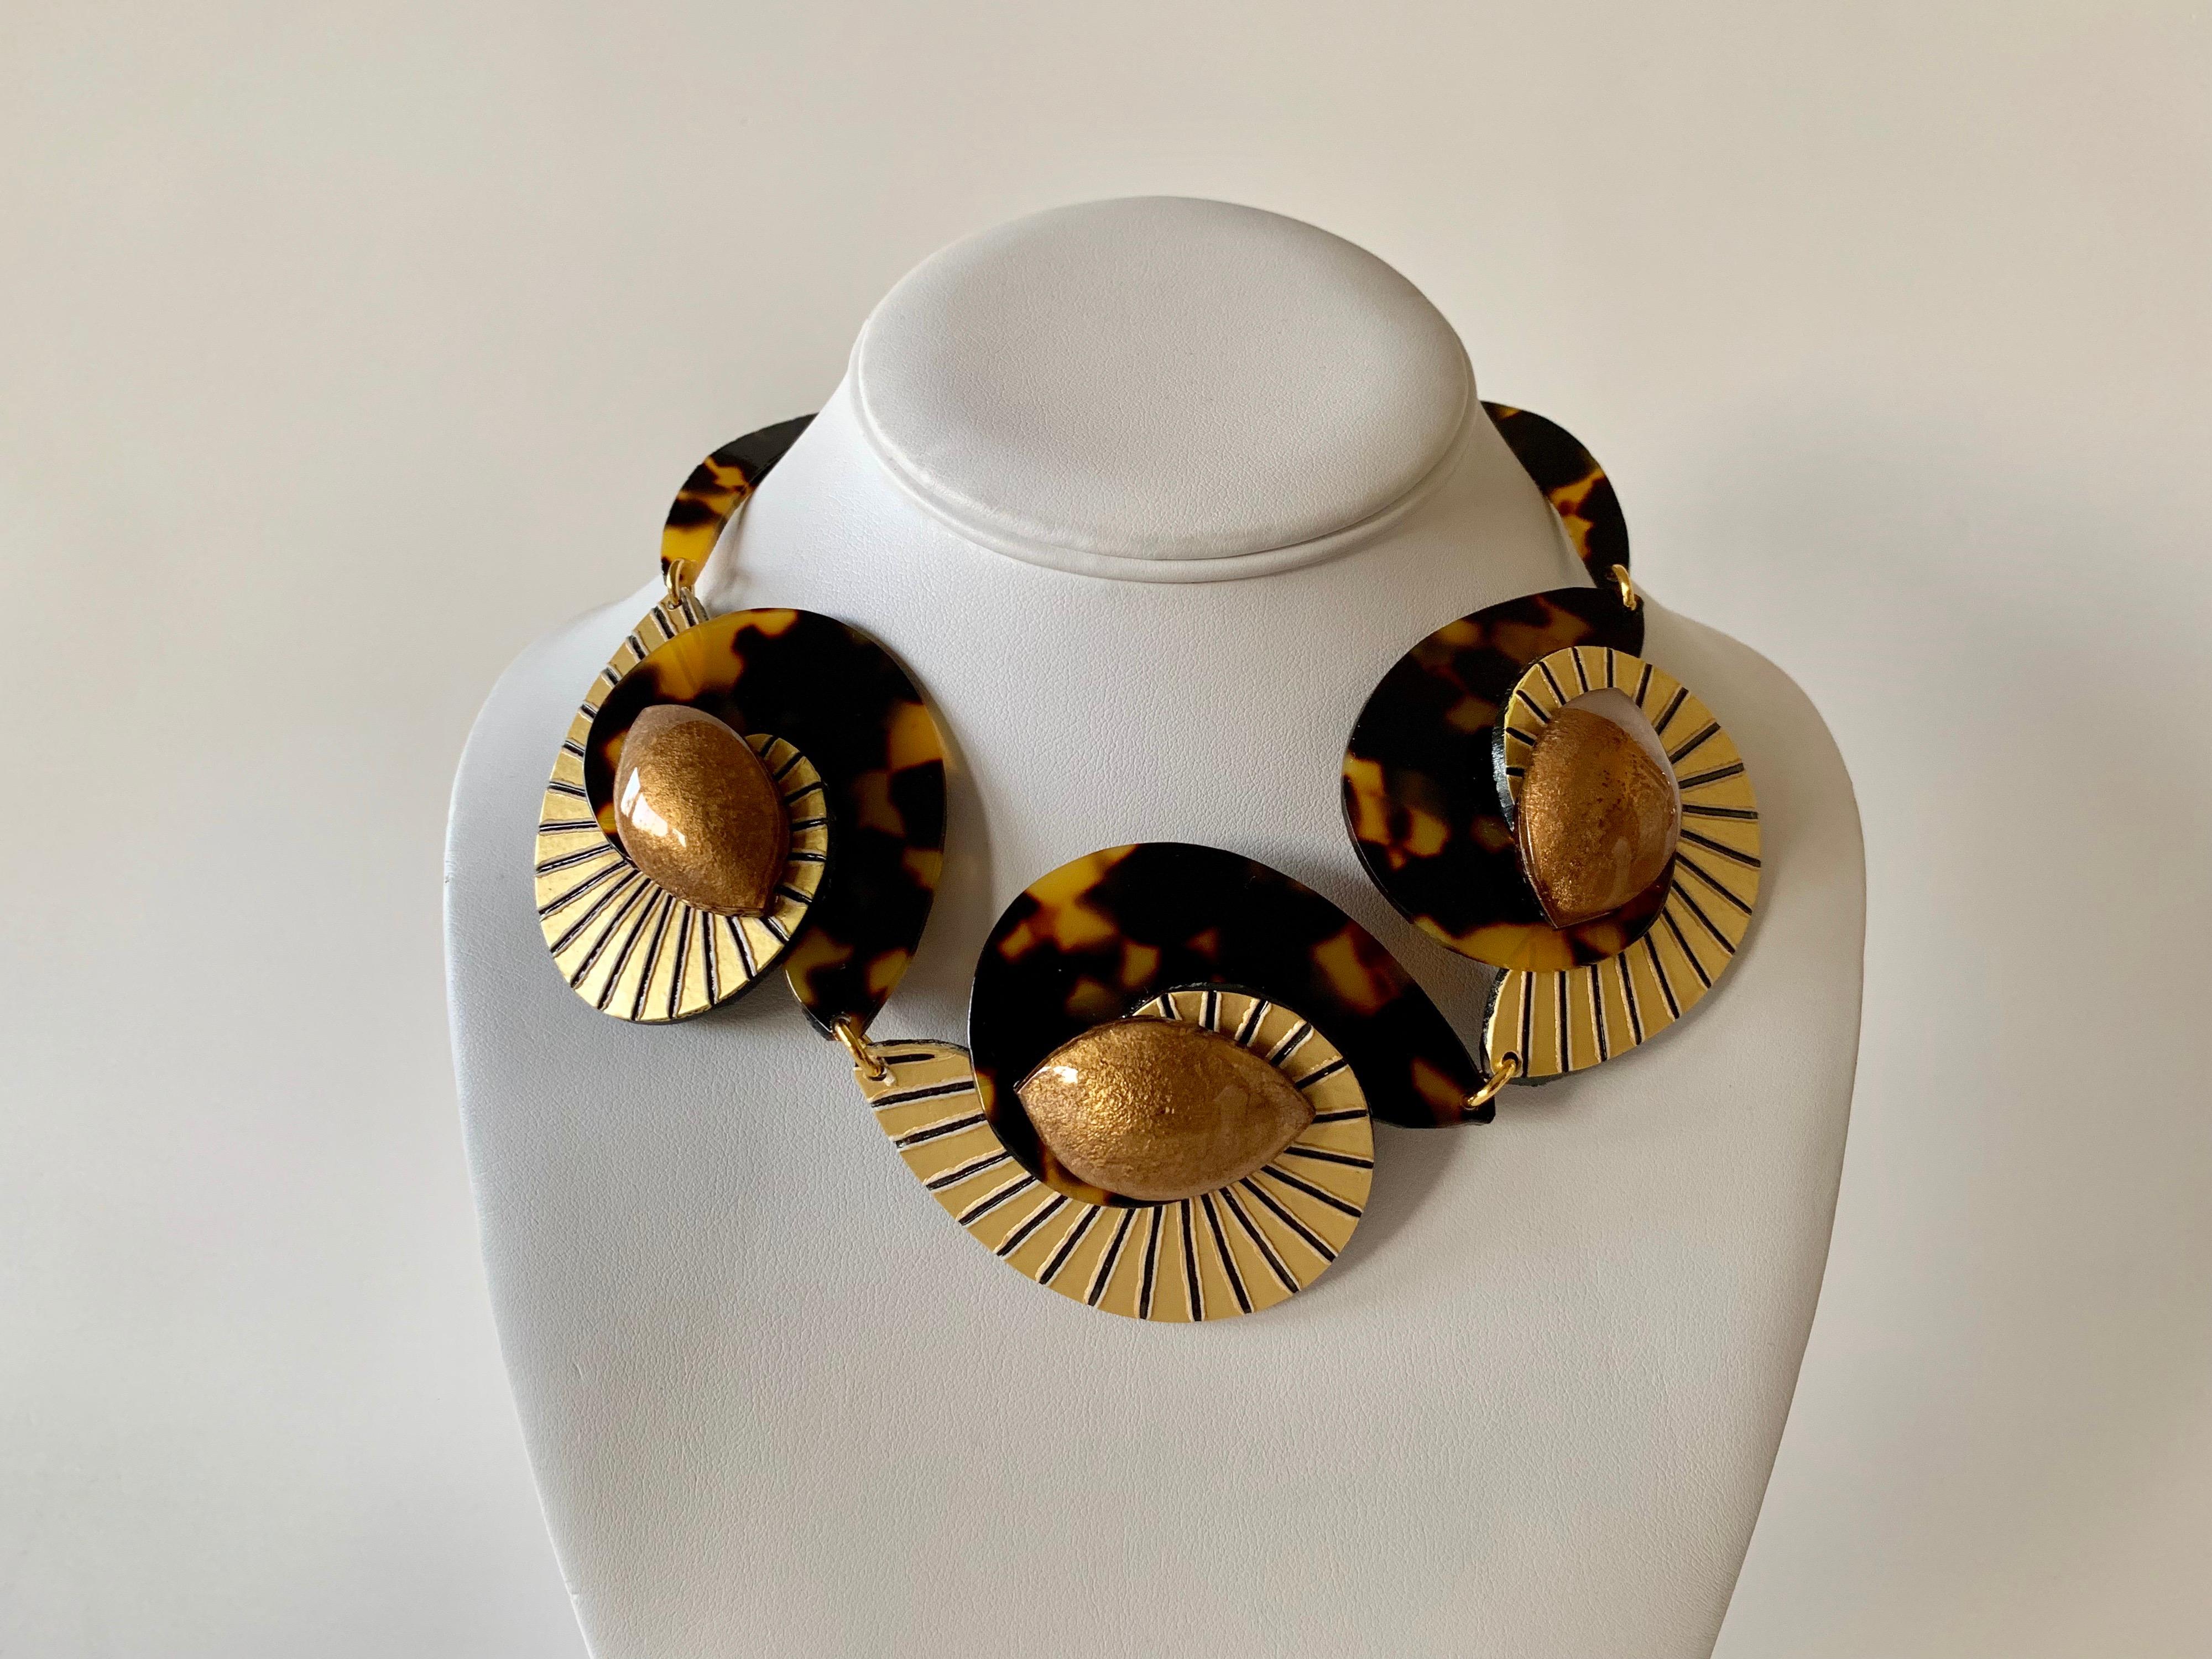 Contemporary faux tortoise gold architectural statement necklace handcrafted in Paris France by Cilea. The statement necklace features architectural enameline (enamel and resin composite) panels in black, gold and tortoise.  A unique well-crafted